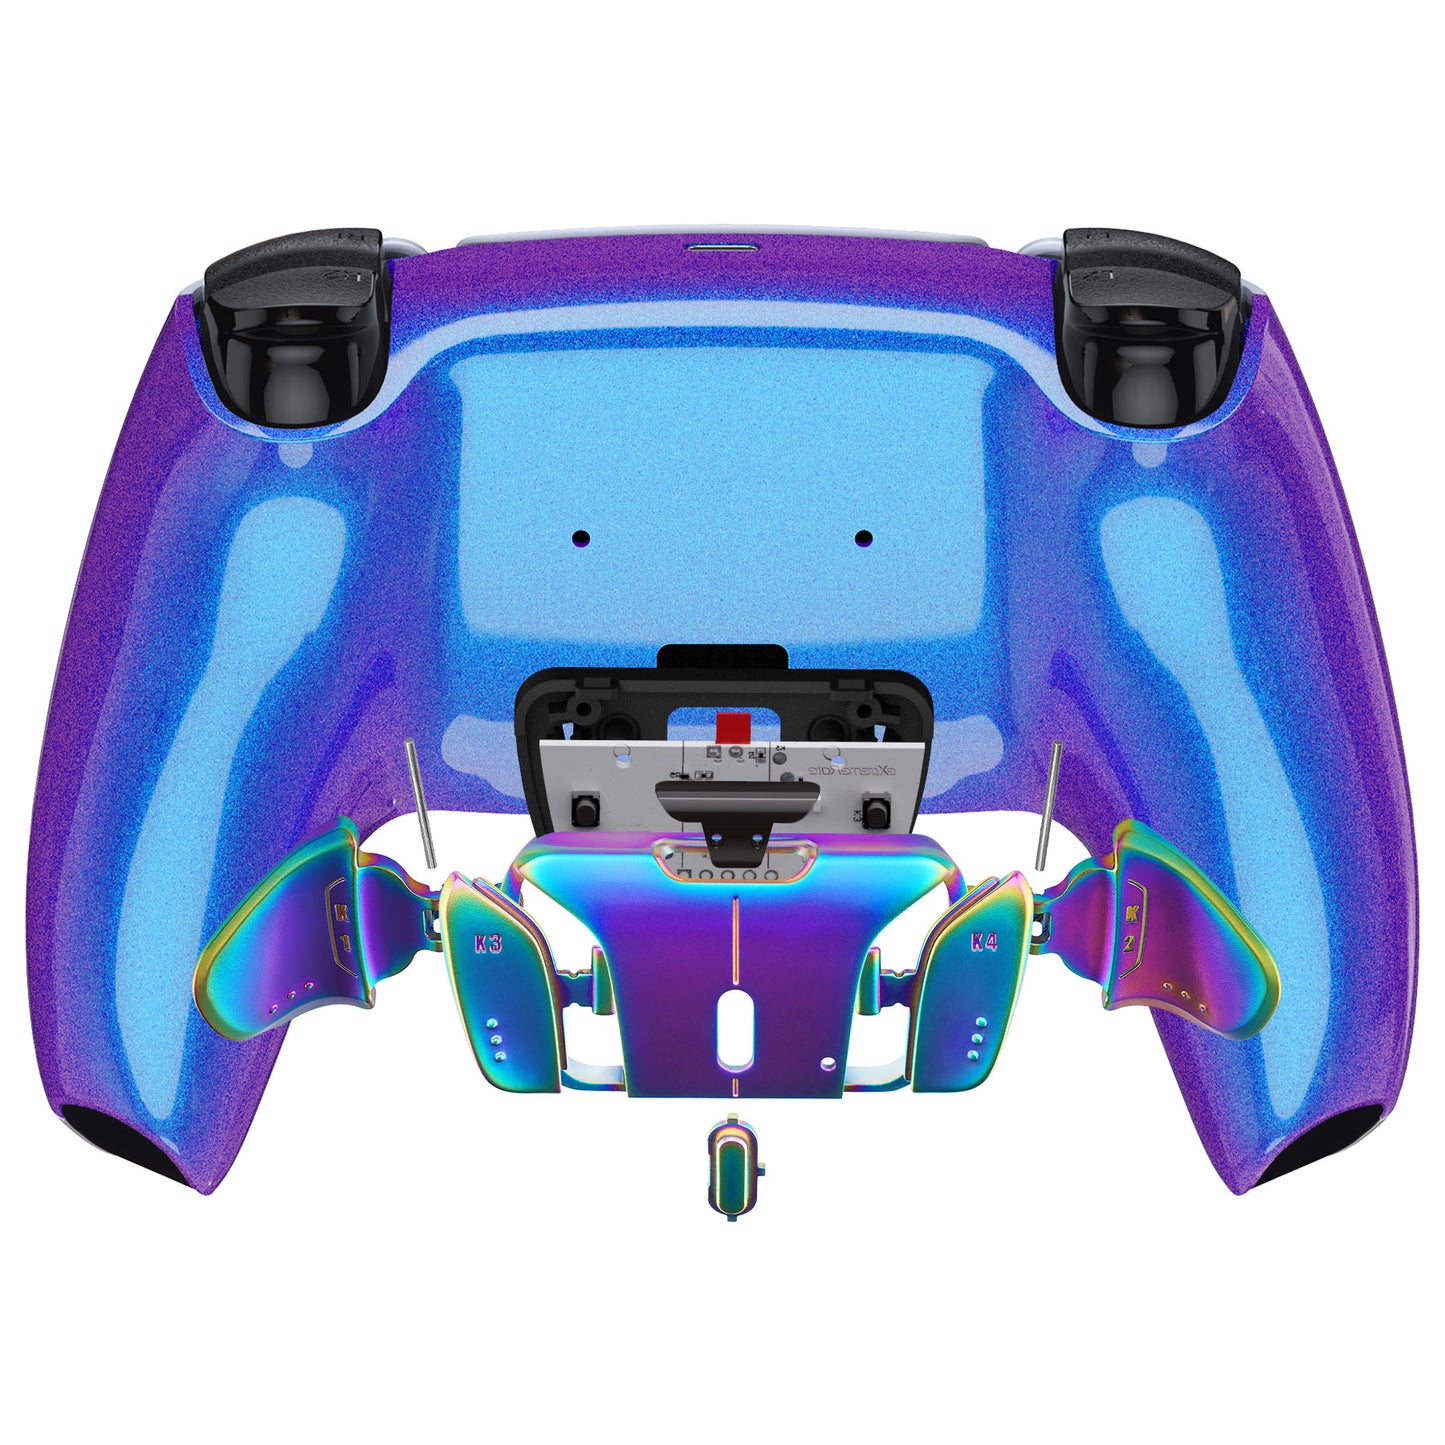 eXtremeRate Rainbow Aura Blue & Purple Real Metal Buttons (RMB) Version RISE4 Remap Kit for PS5 Controller BDM-010/020 - Chameleon Purple Blue eXtremeRate